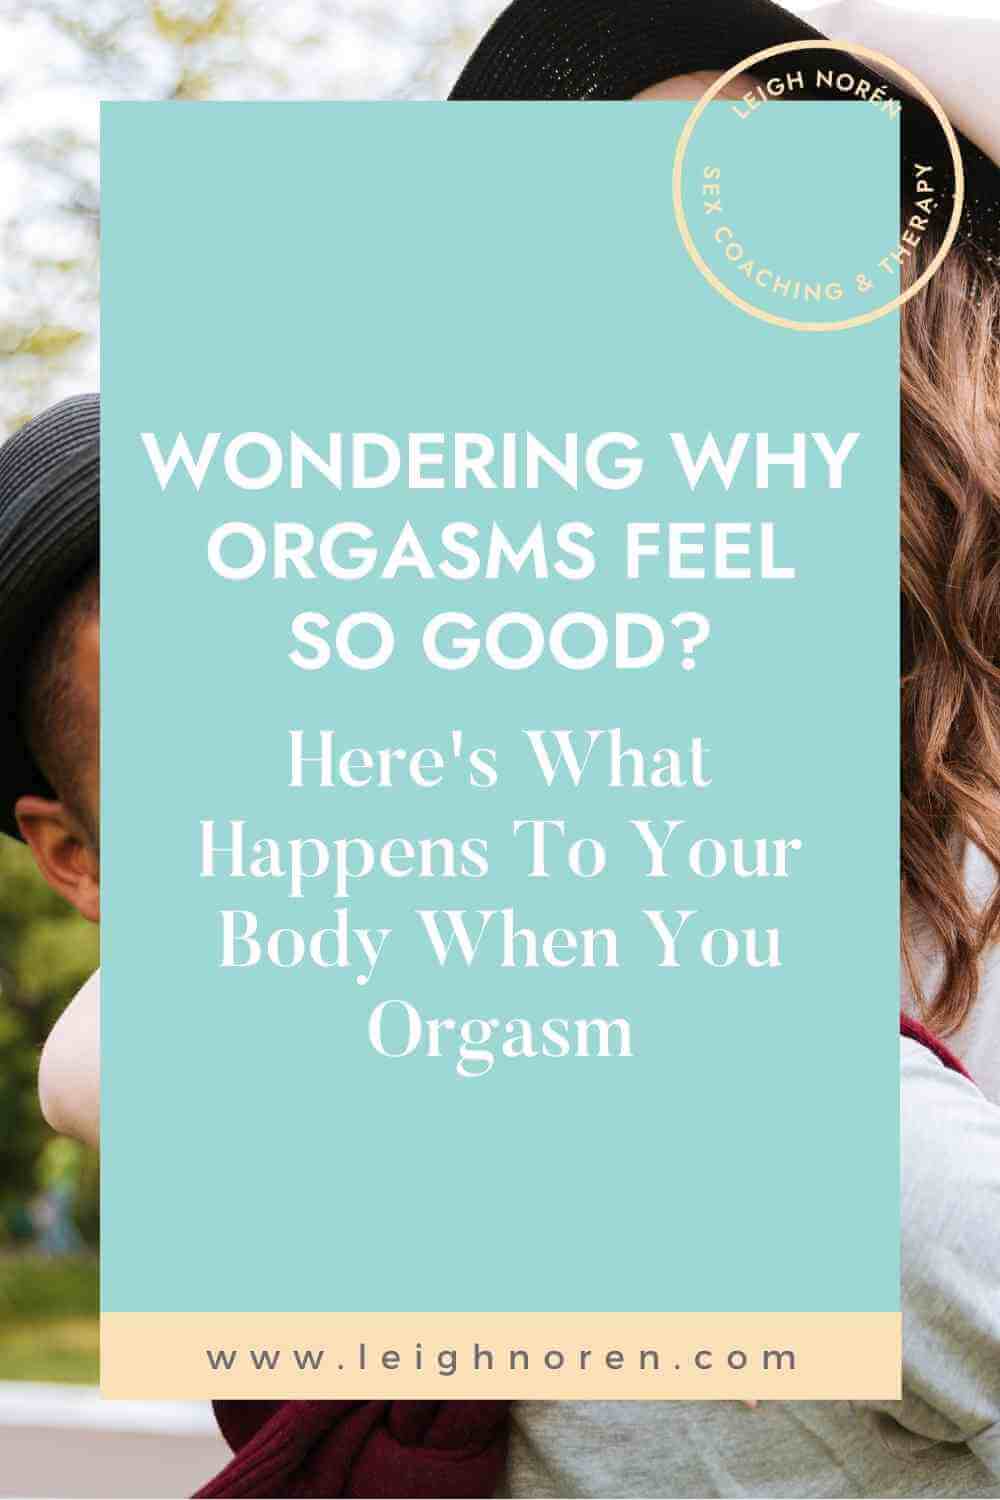 Wondering Why Orgasms Feel So Good? Here's What Happens to Your Body When You Orgasm